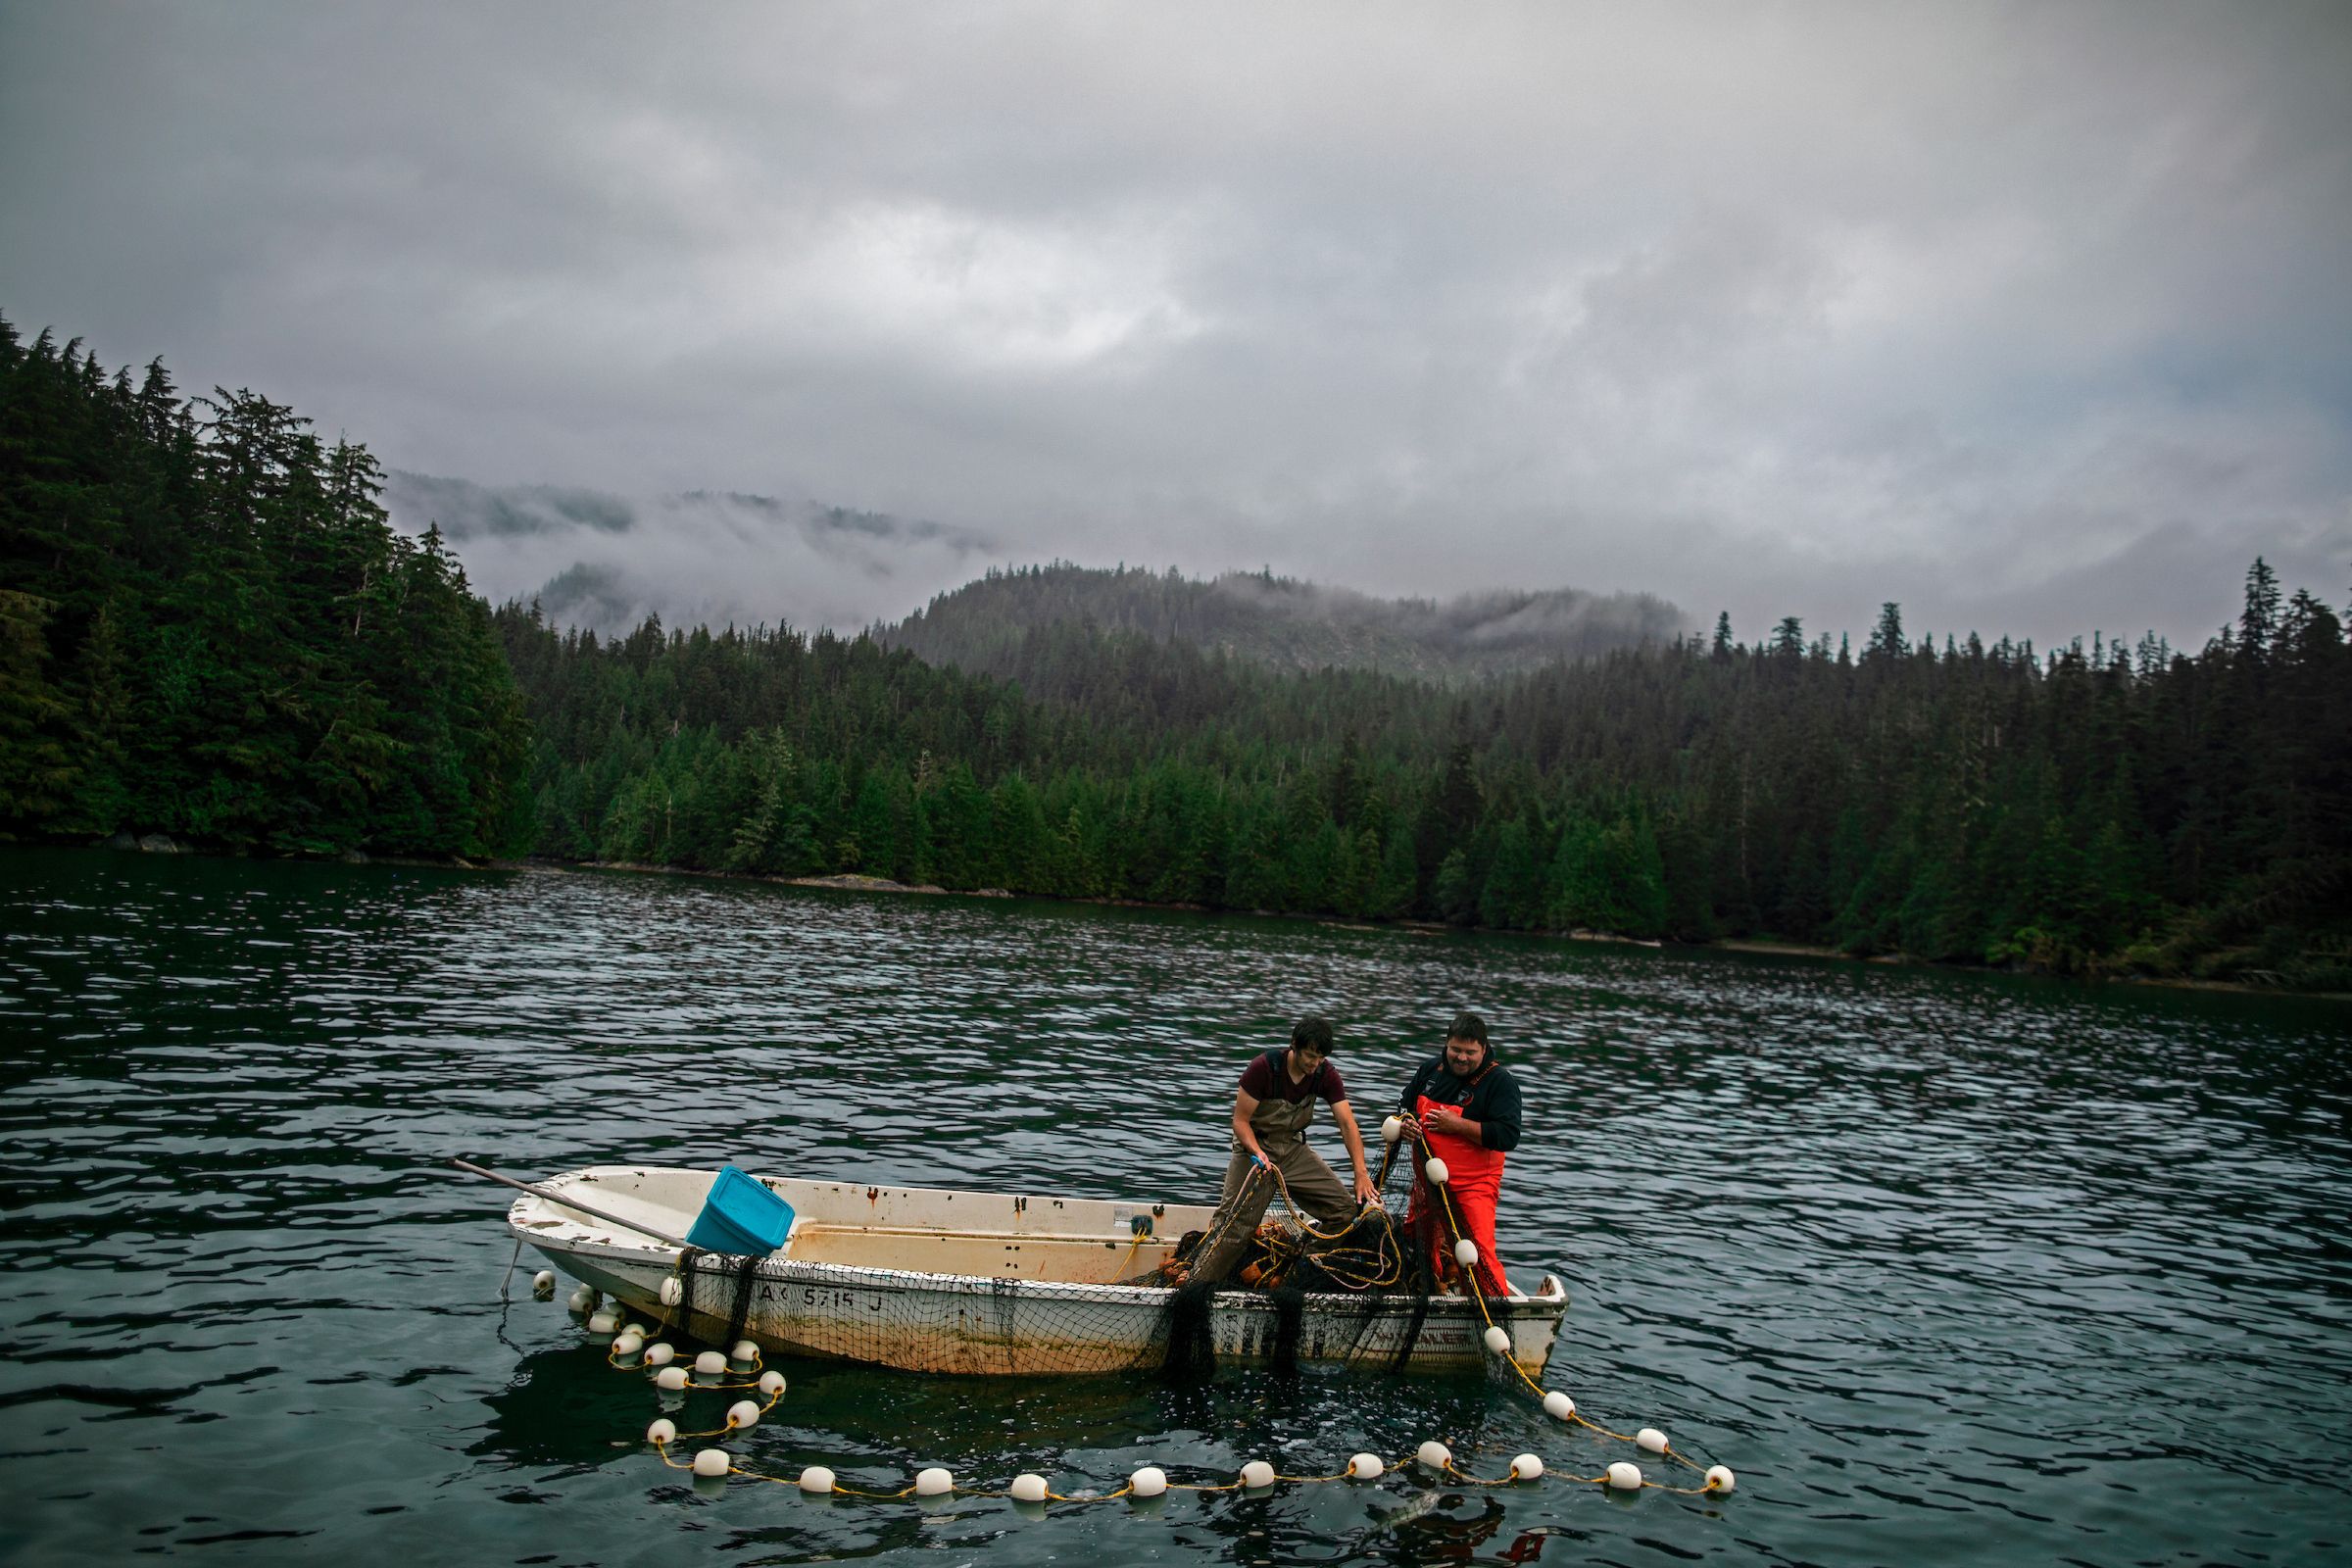 Sockeye fishing in Hatta Lake, near Hydaburg, a watershed protected by the carbon agreement that Sealaska secured for the region. Image by Joshua Cogan. United States, 2019.